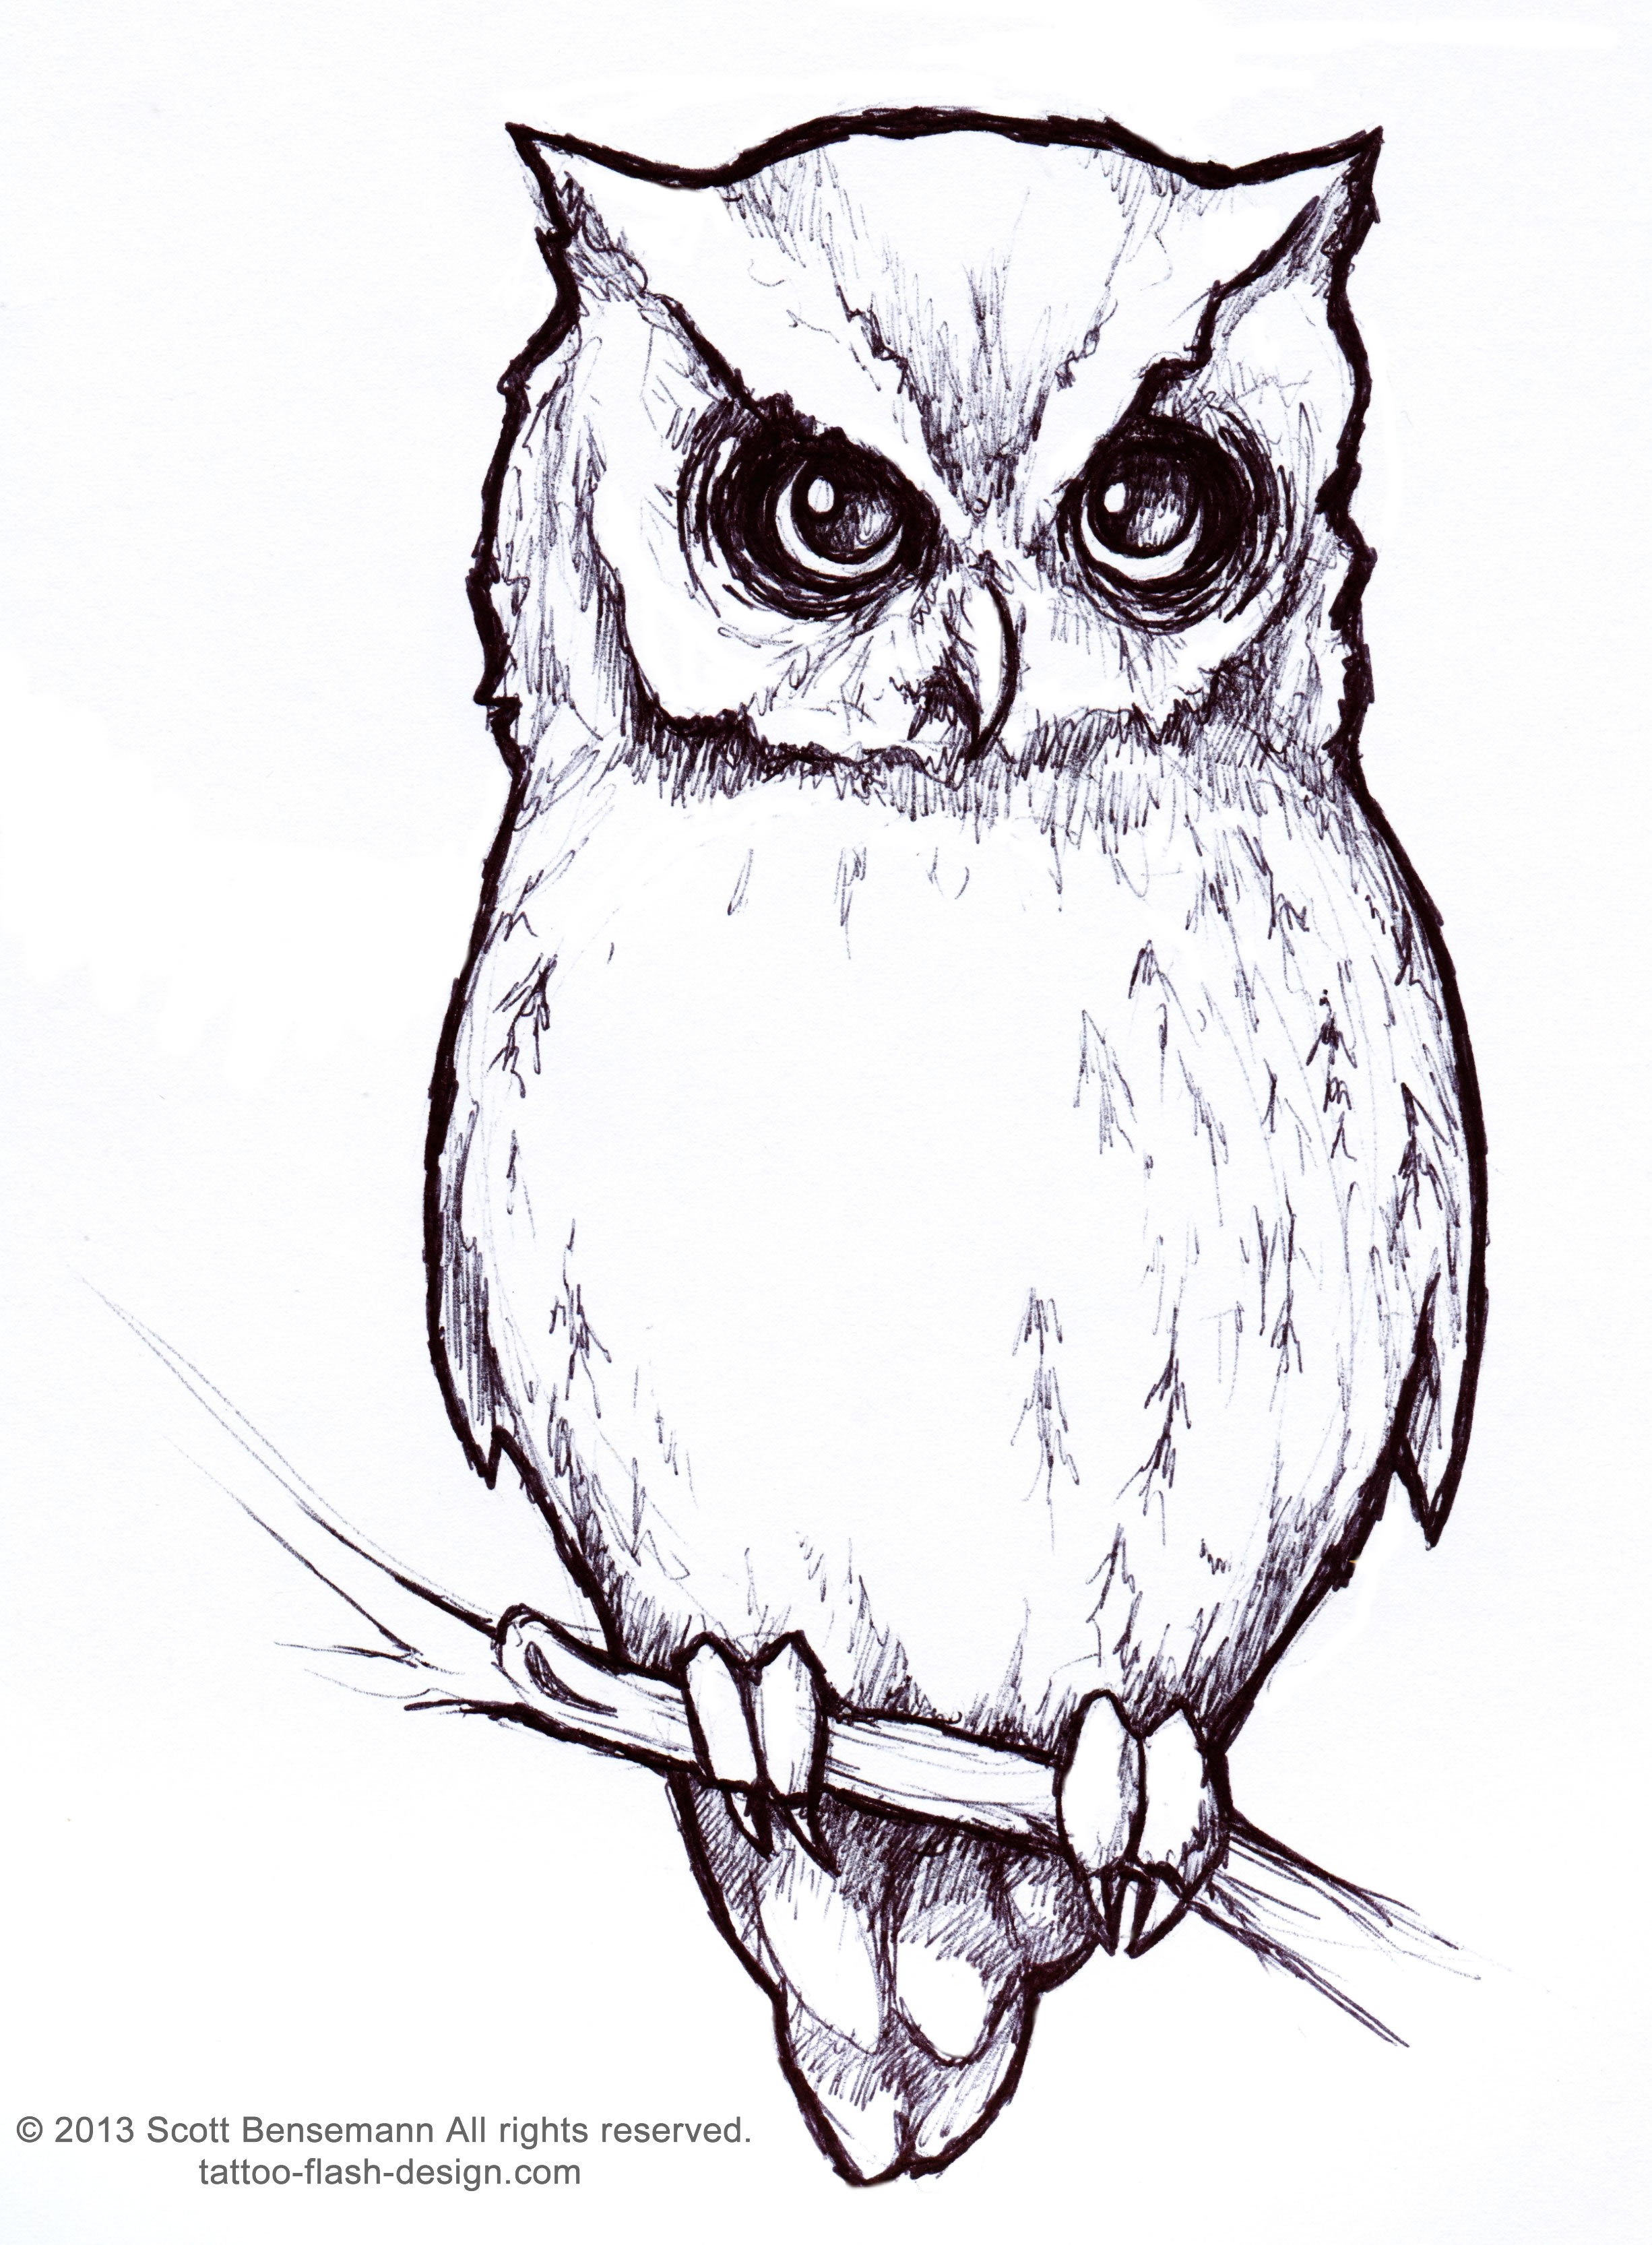 Free Owl Outline, Download Free Owl Outline png images, Free ClipArts